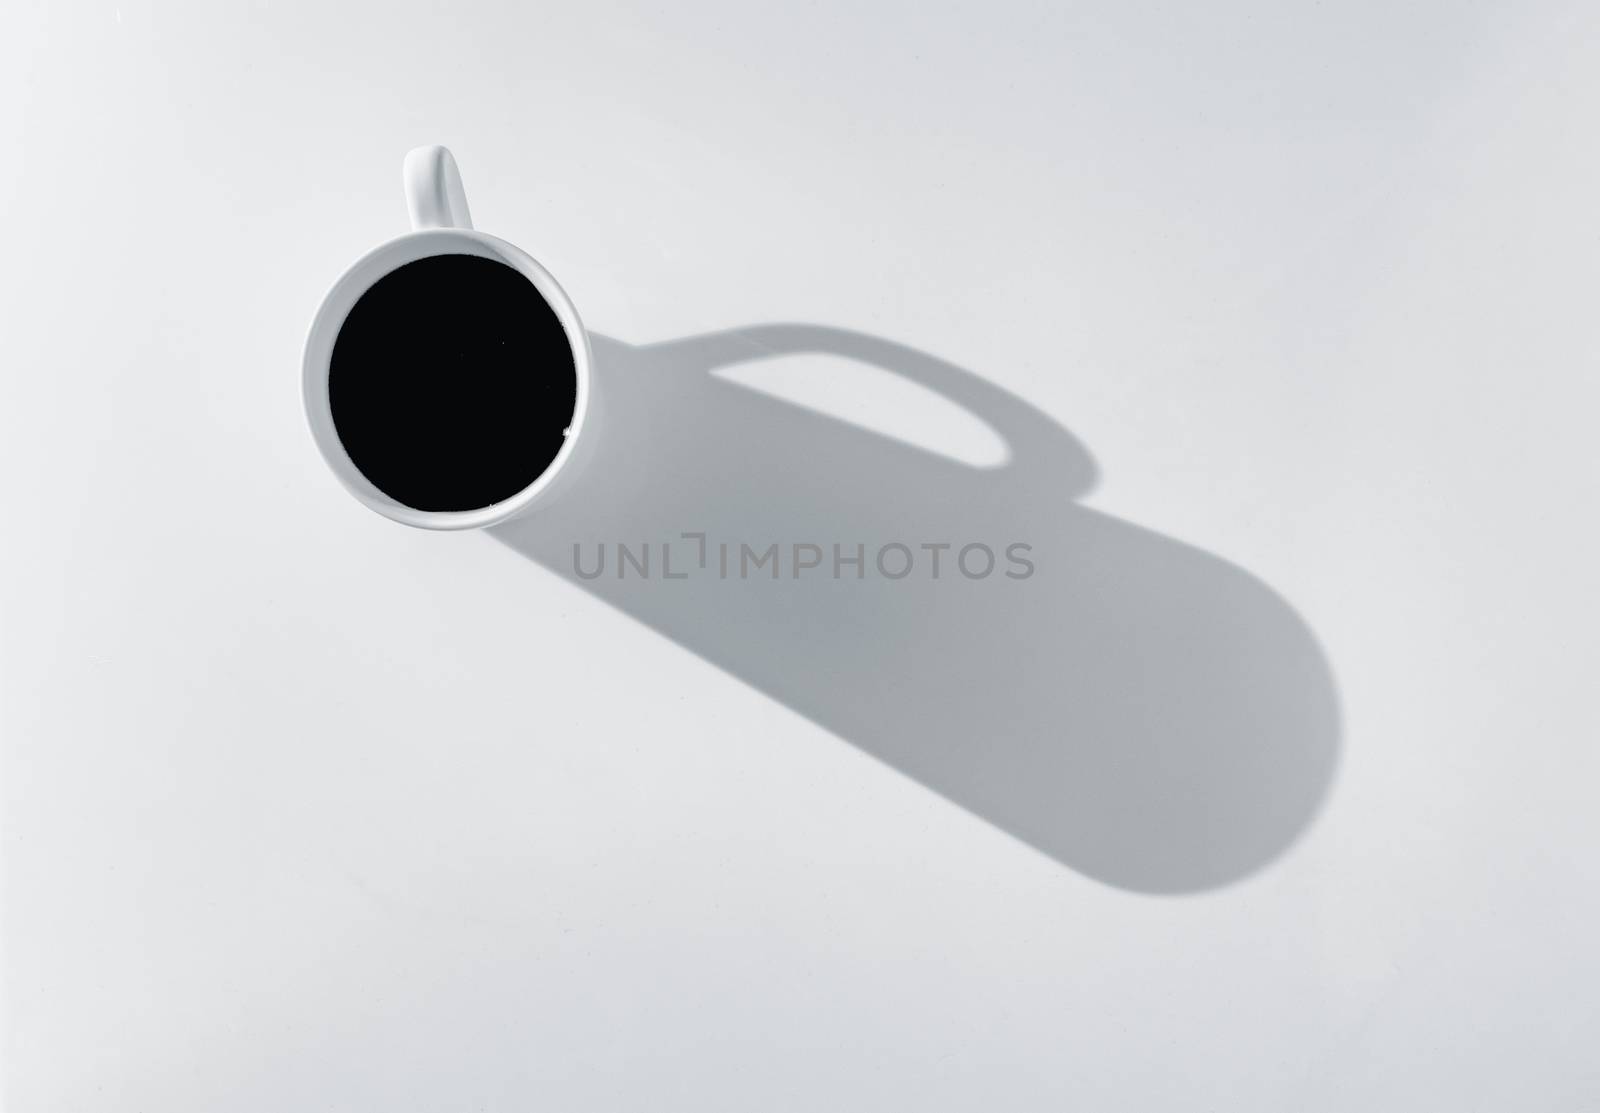 Coffee in cup on a white background, casting a strong shadow in this high key photo.